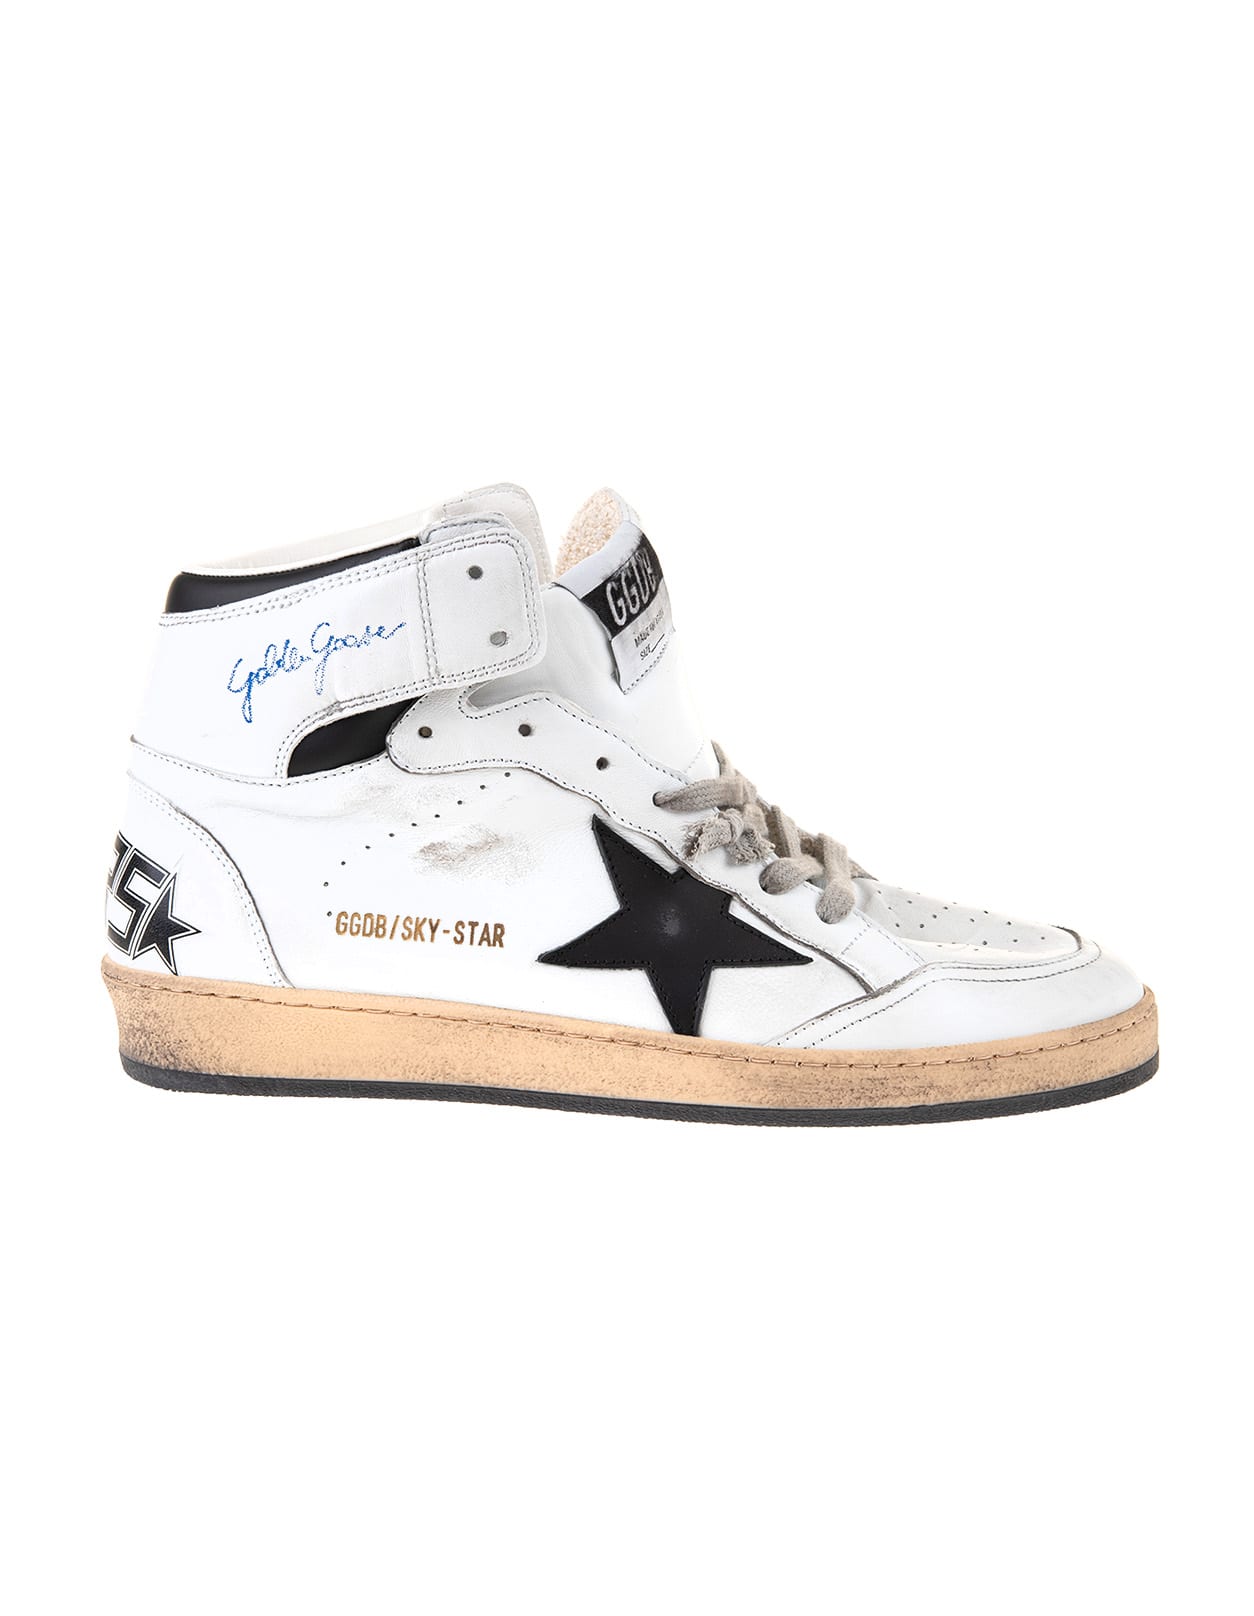 Golden Goose Man White And Black Sky-star Sneakers